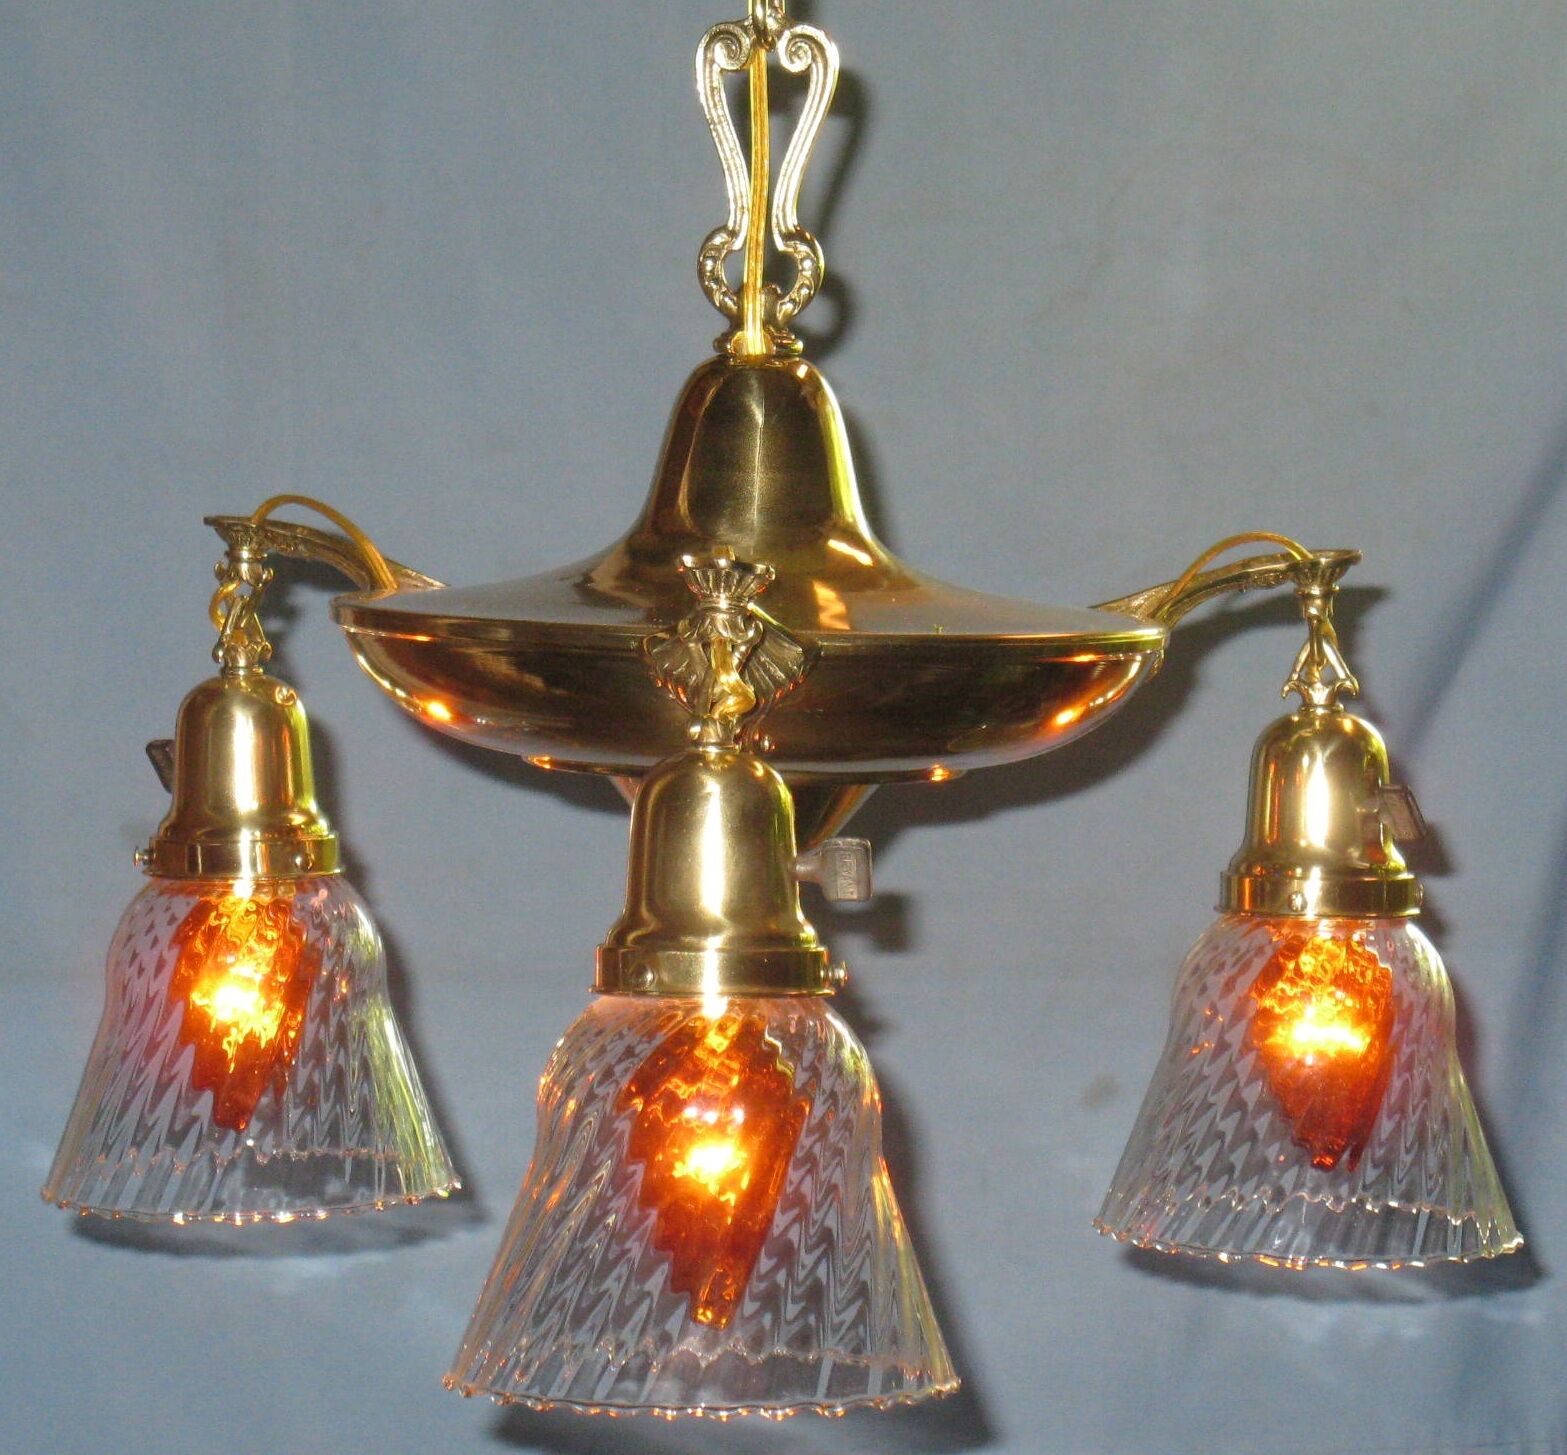 ANTIQUE SOLID BRASS 3-LIGHT PAN CEILING FIXTURE INDIVIDUAL SWITCHES CAP SHADES